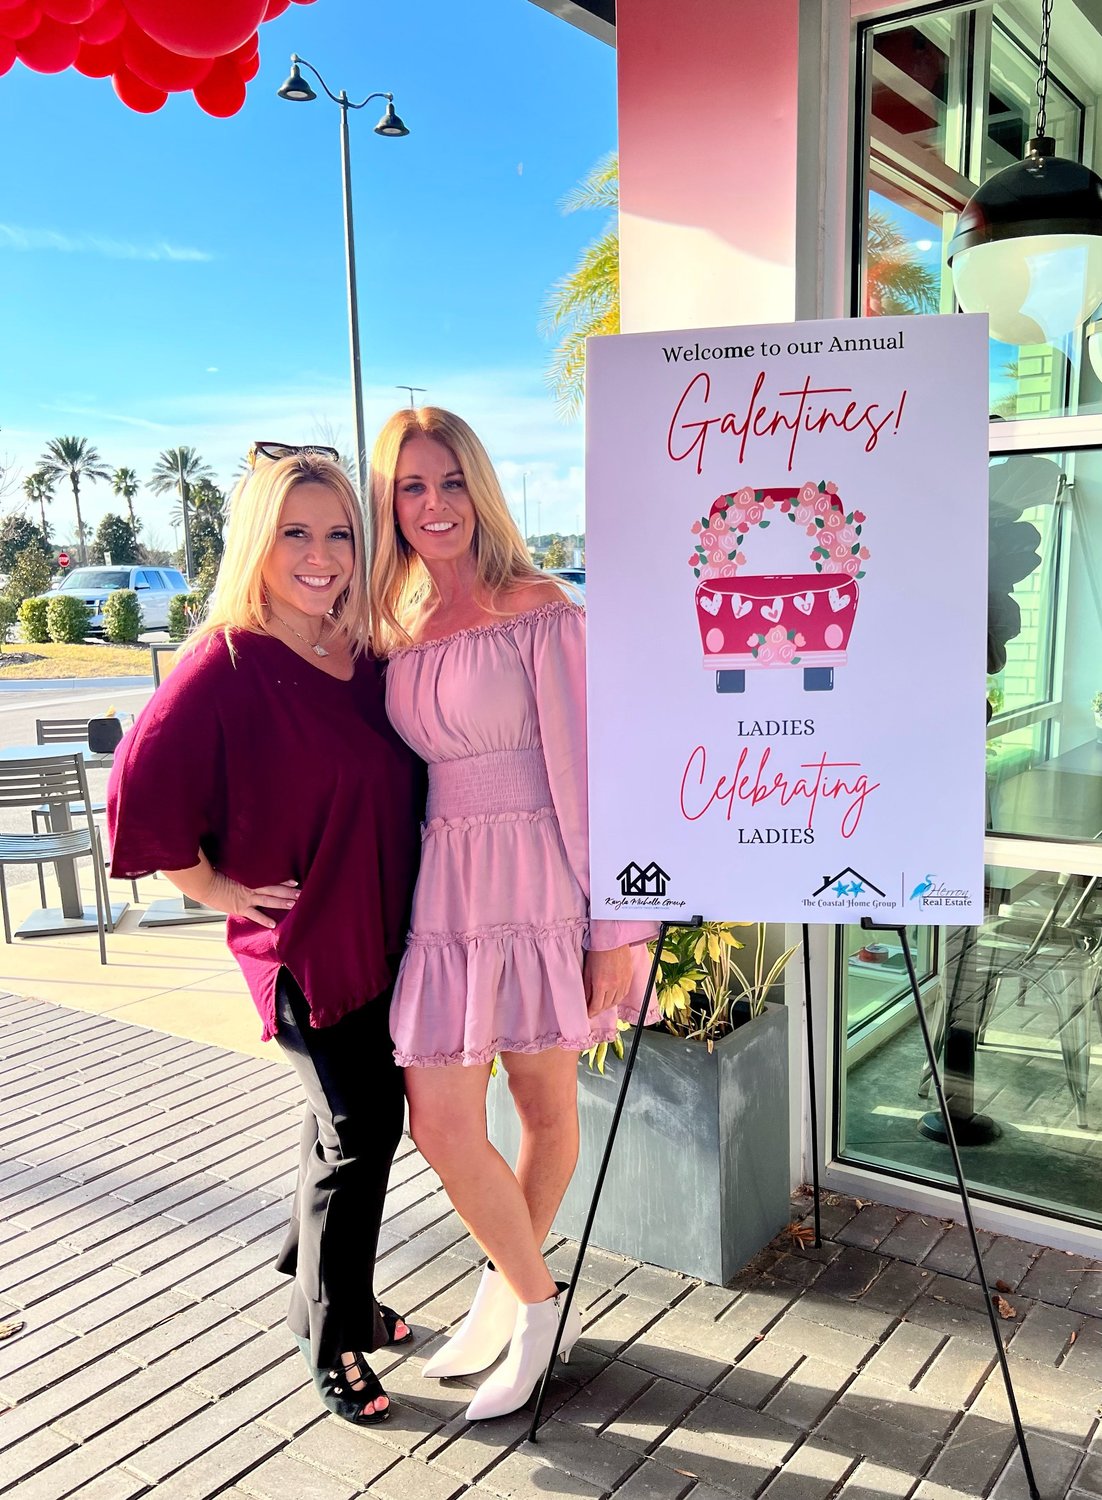 Coastal Home Group is partnering with Clean Juice in Nocatee to host a Galentine’s Day event at the location Feb. 11 from noon to 3 p.m.